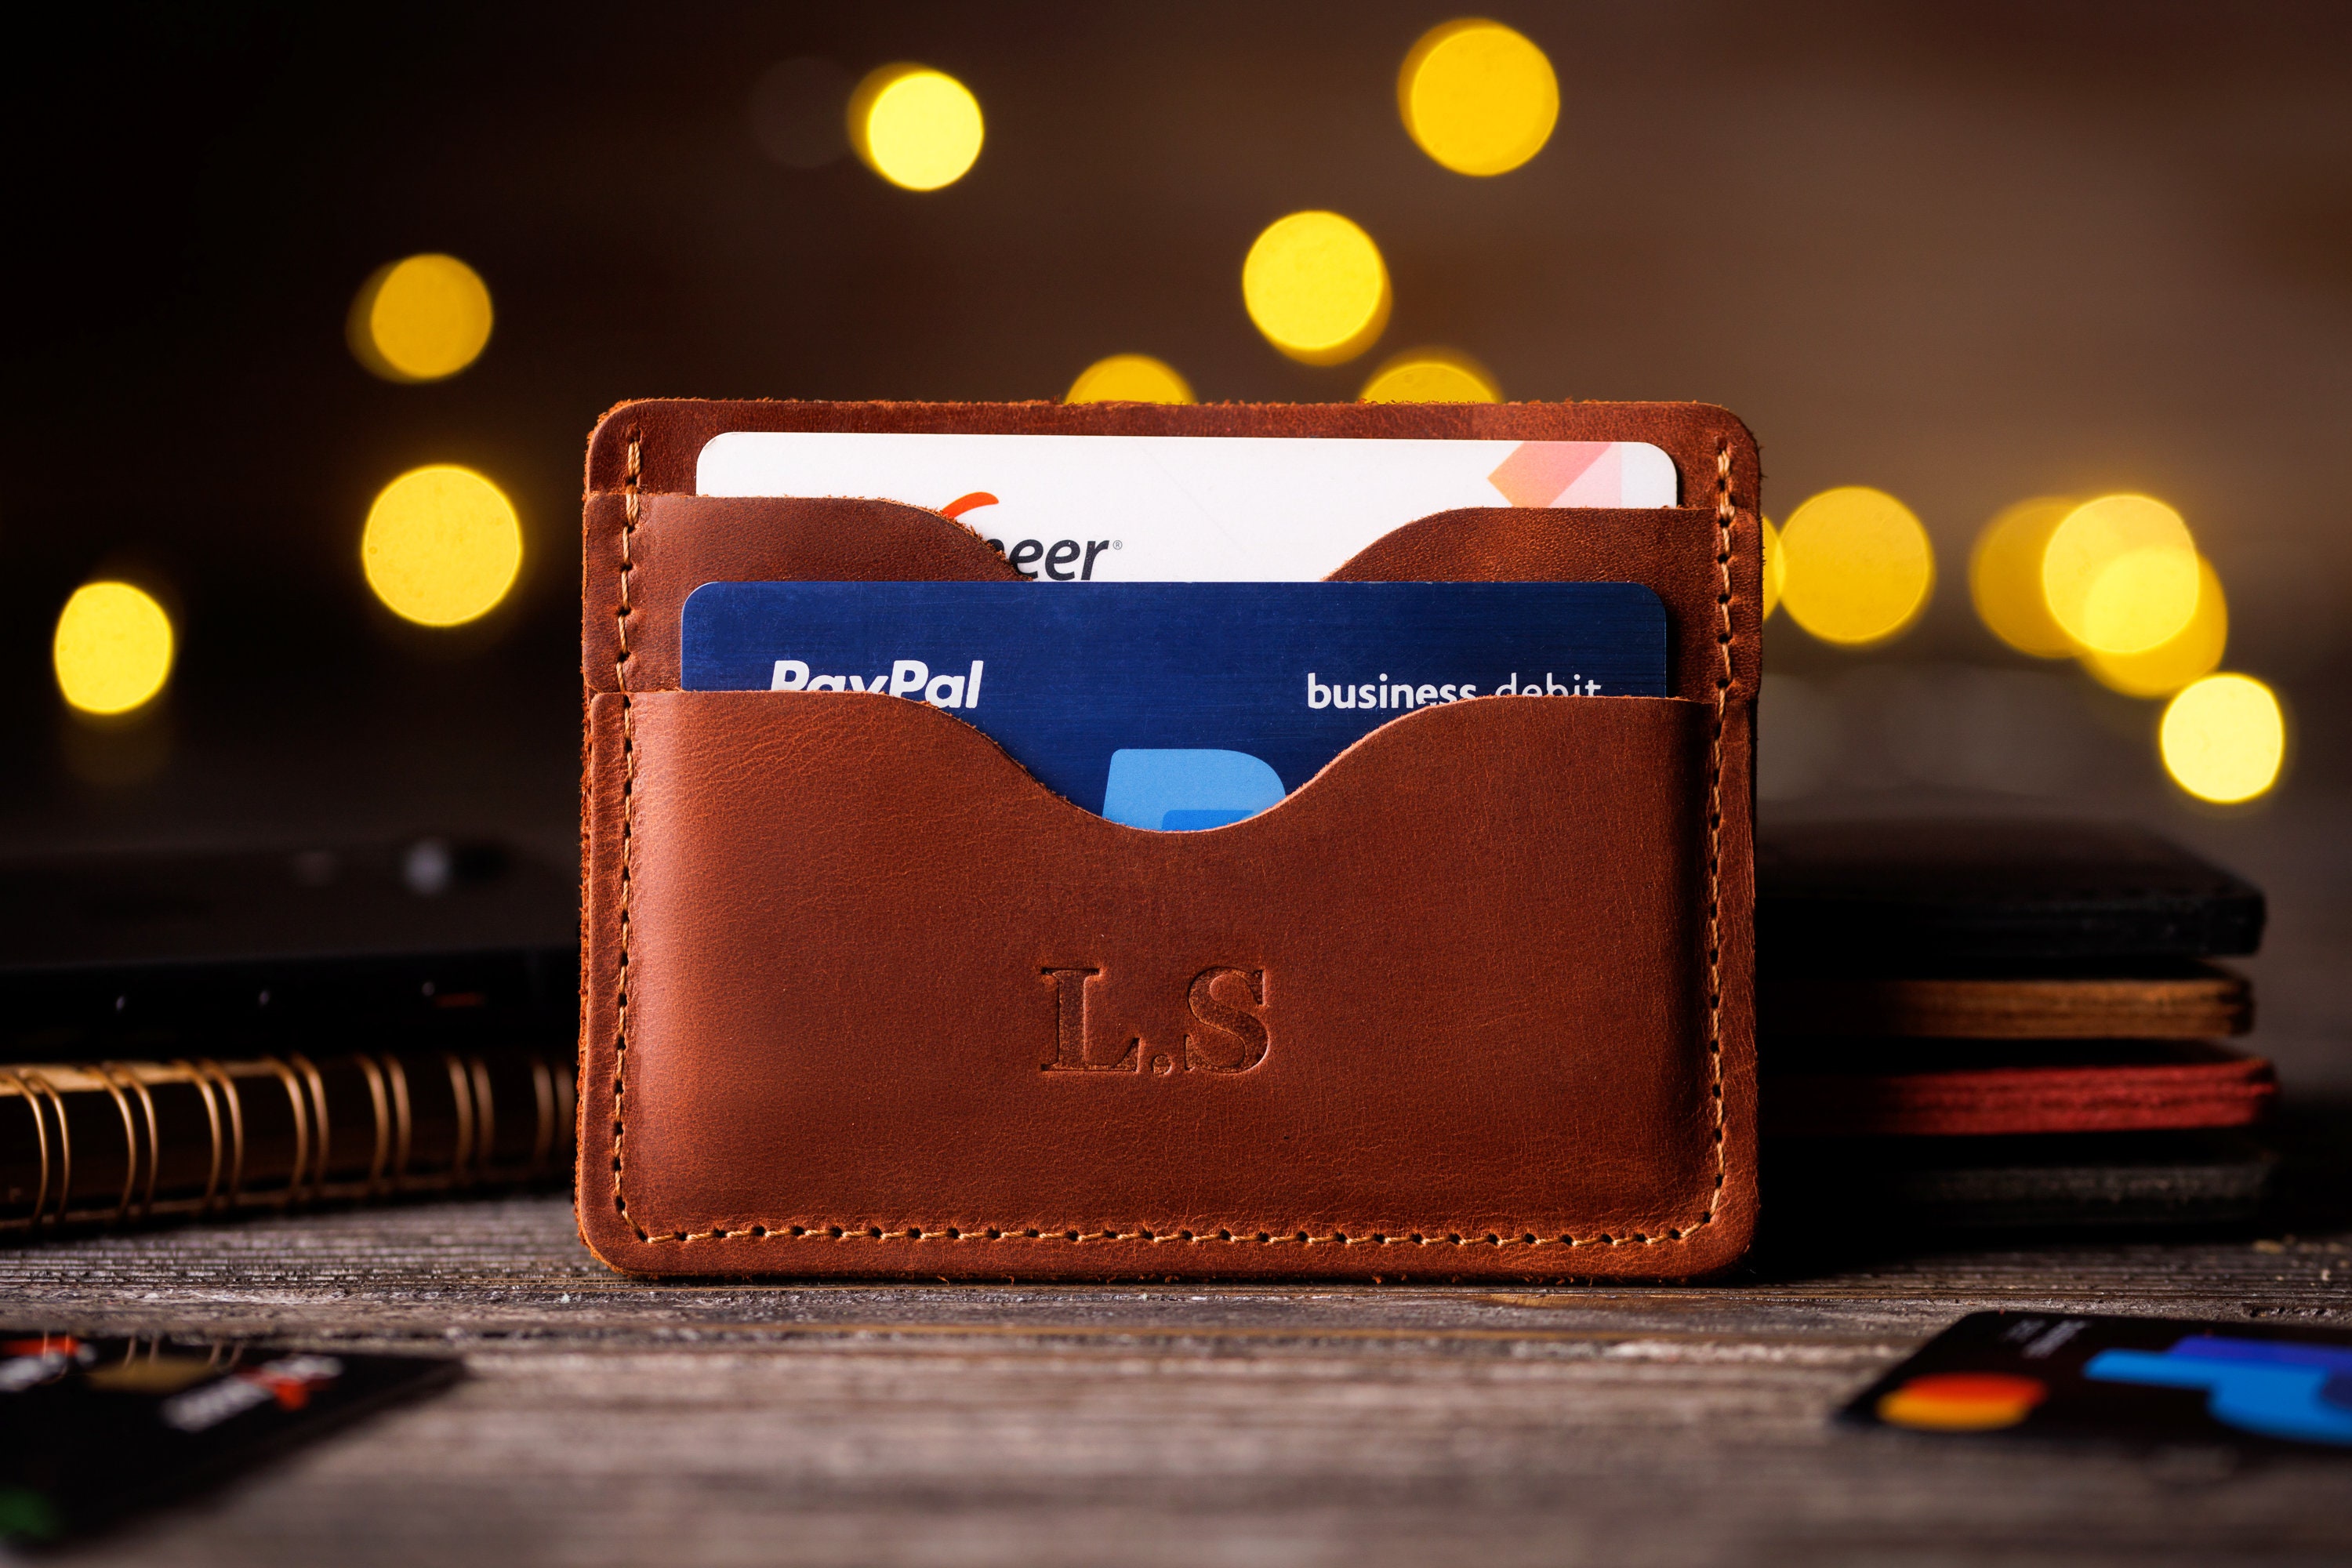 Marshal Credit Card Organizer Wallet for Women with 20+ card Slots